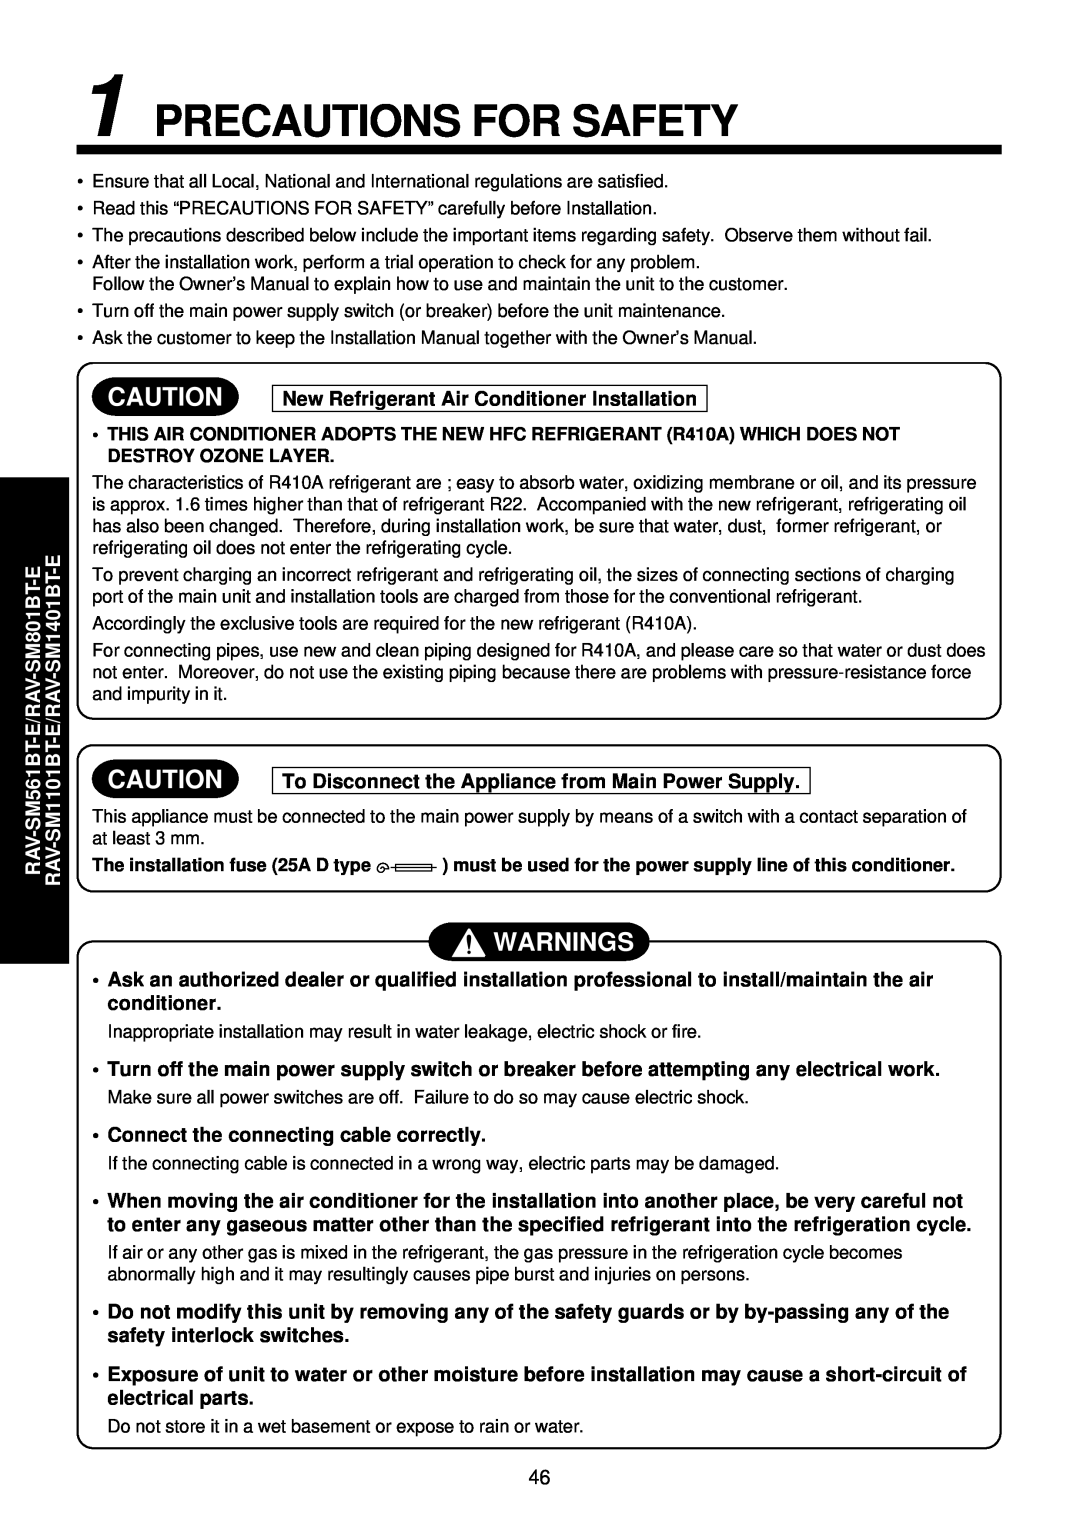 Toshiba R410A service manual Warnings, Precautions For Safety, New Refrigerant Air Conditioner Installation 